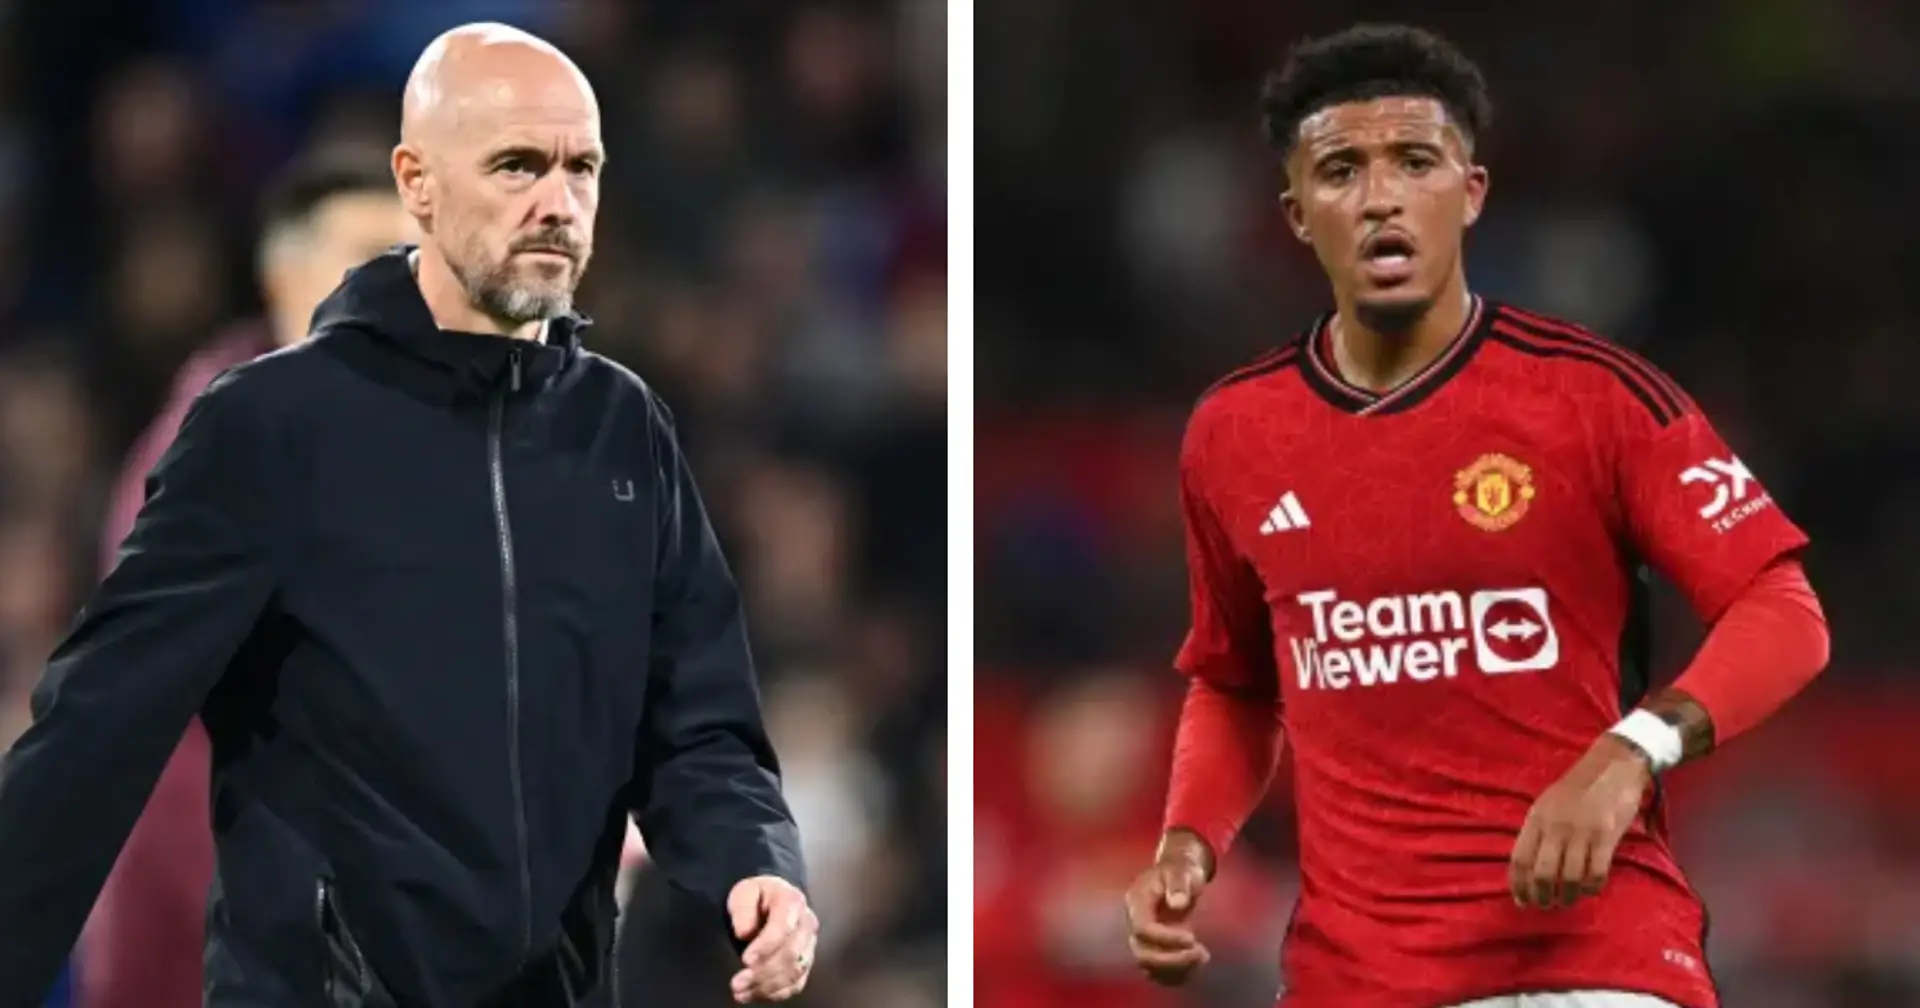 'It can be resolved very quickly': Jadon Sancho told to suck it up and apologise to Ten Hag